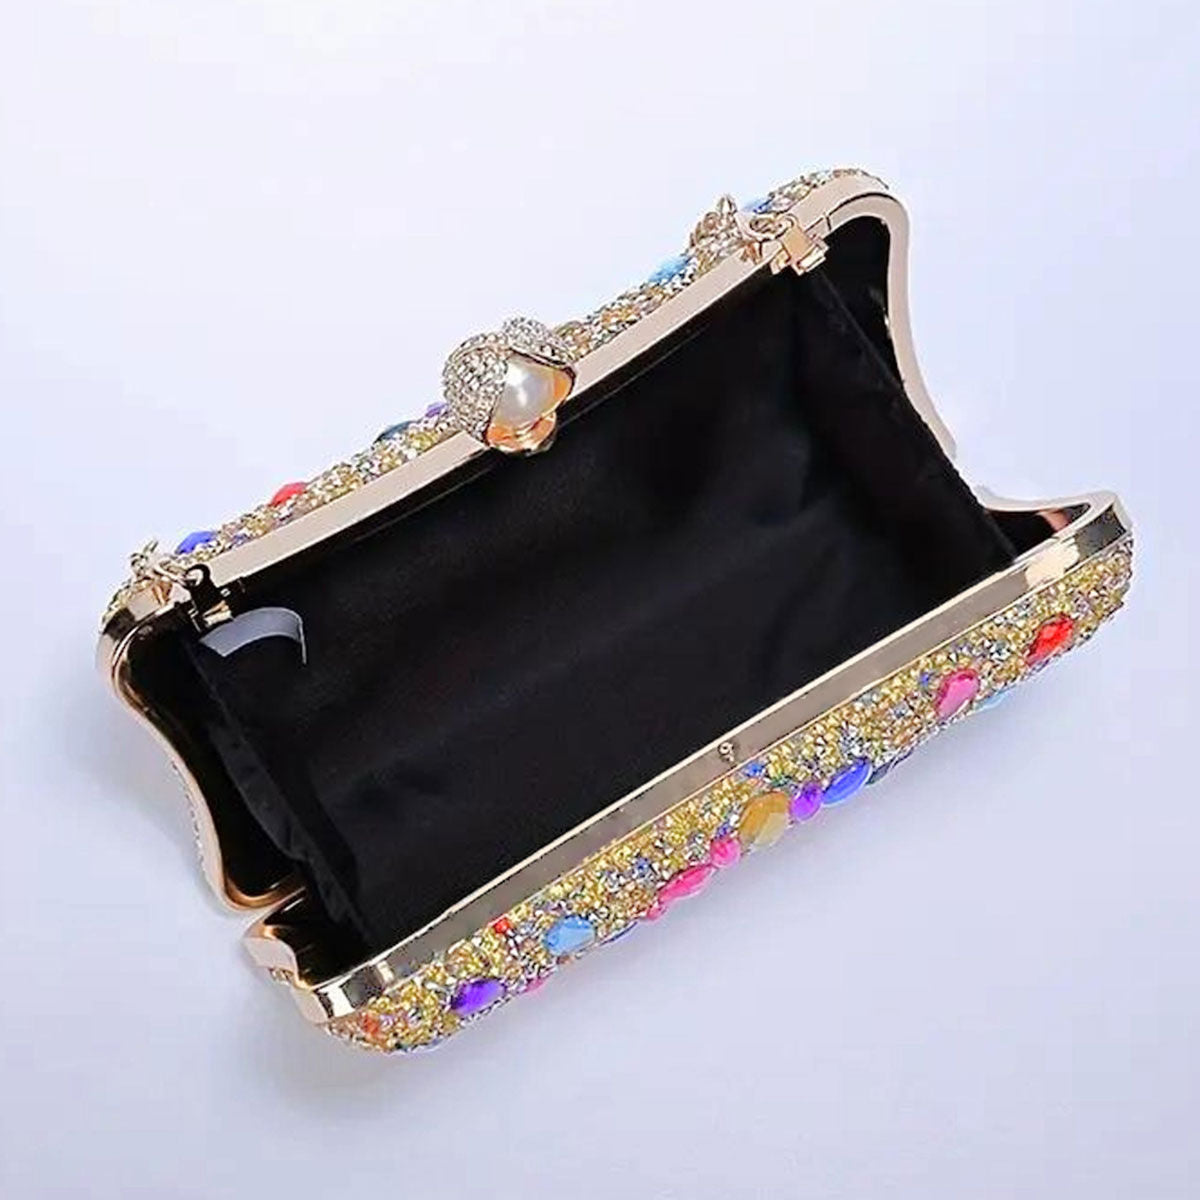 Clutch Colorful Crystal Hard Case Clutch for Women